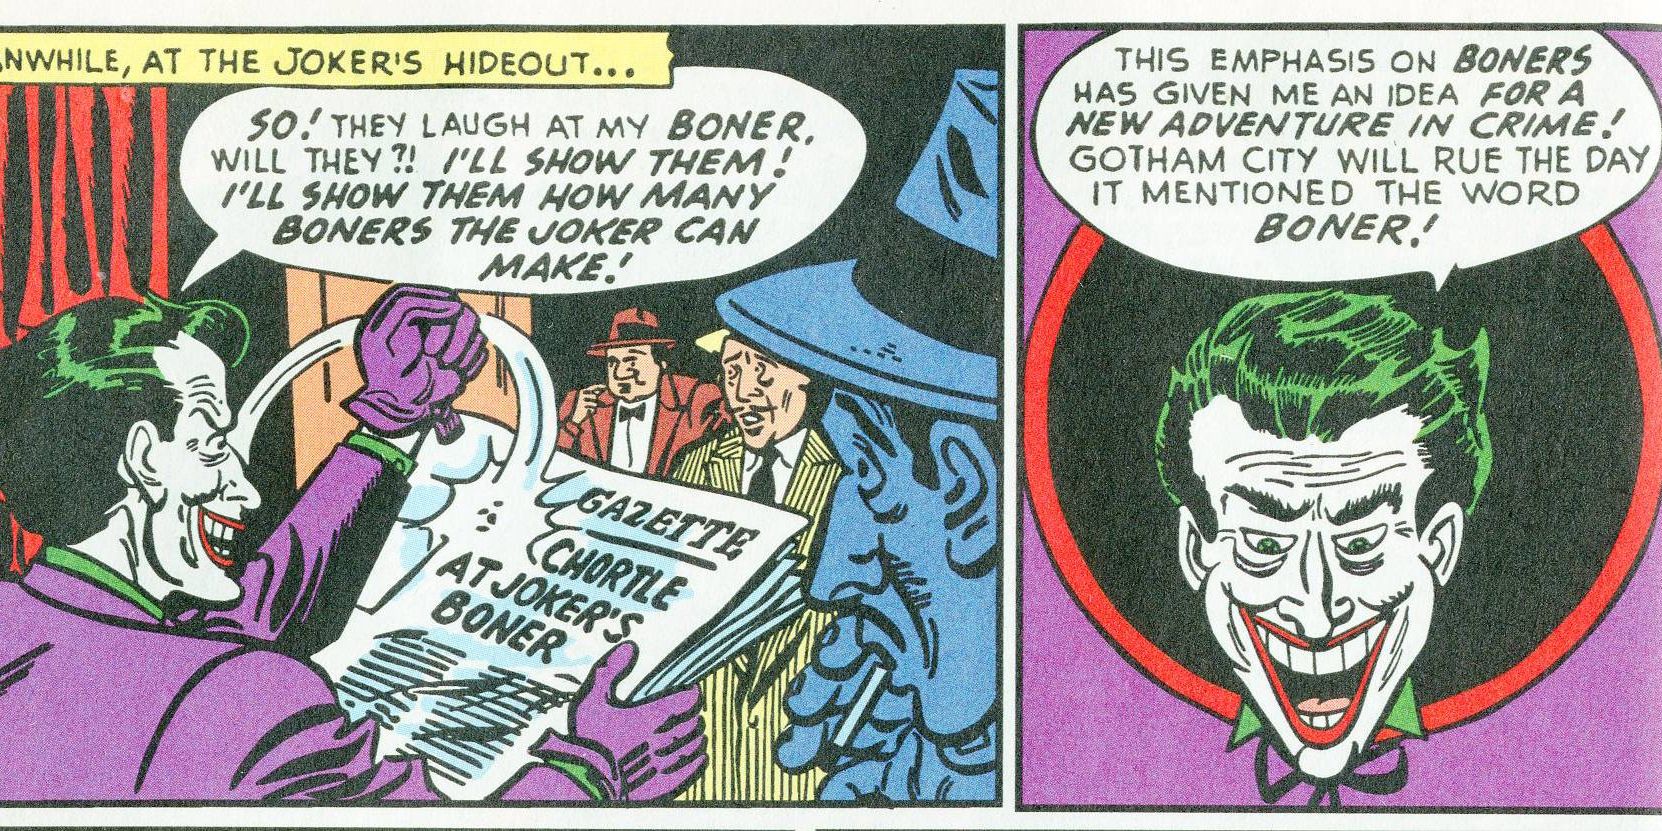 The Jokers Boner Comic is Crazier Than You Think